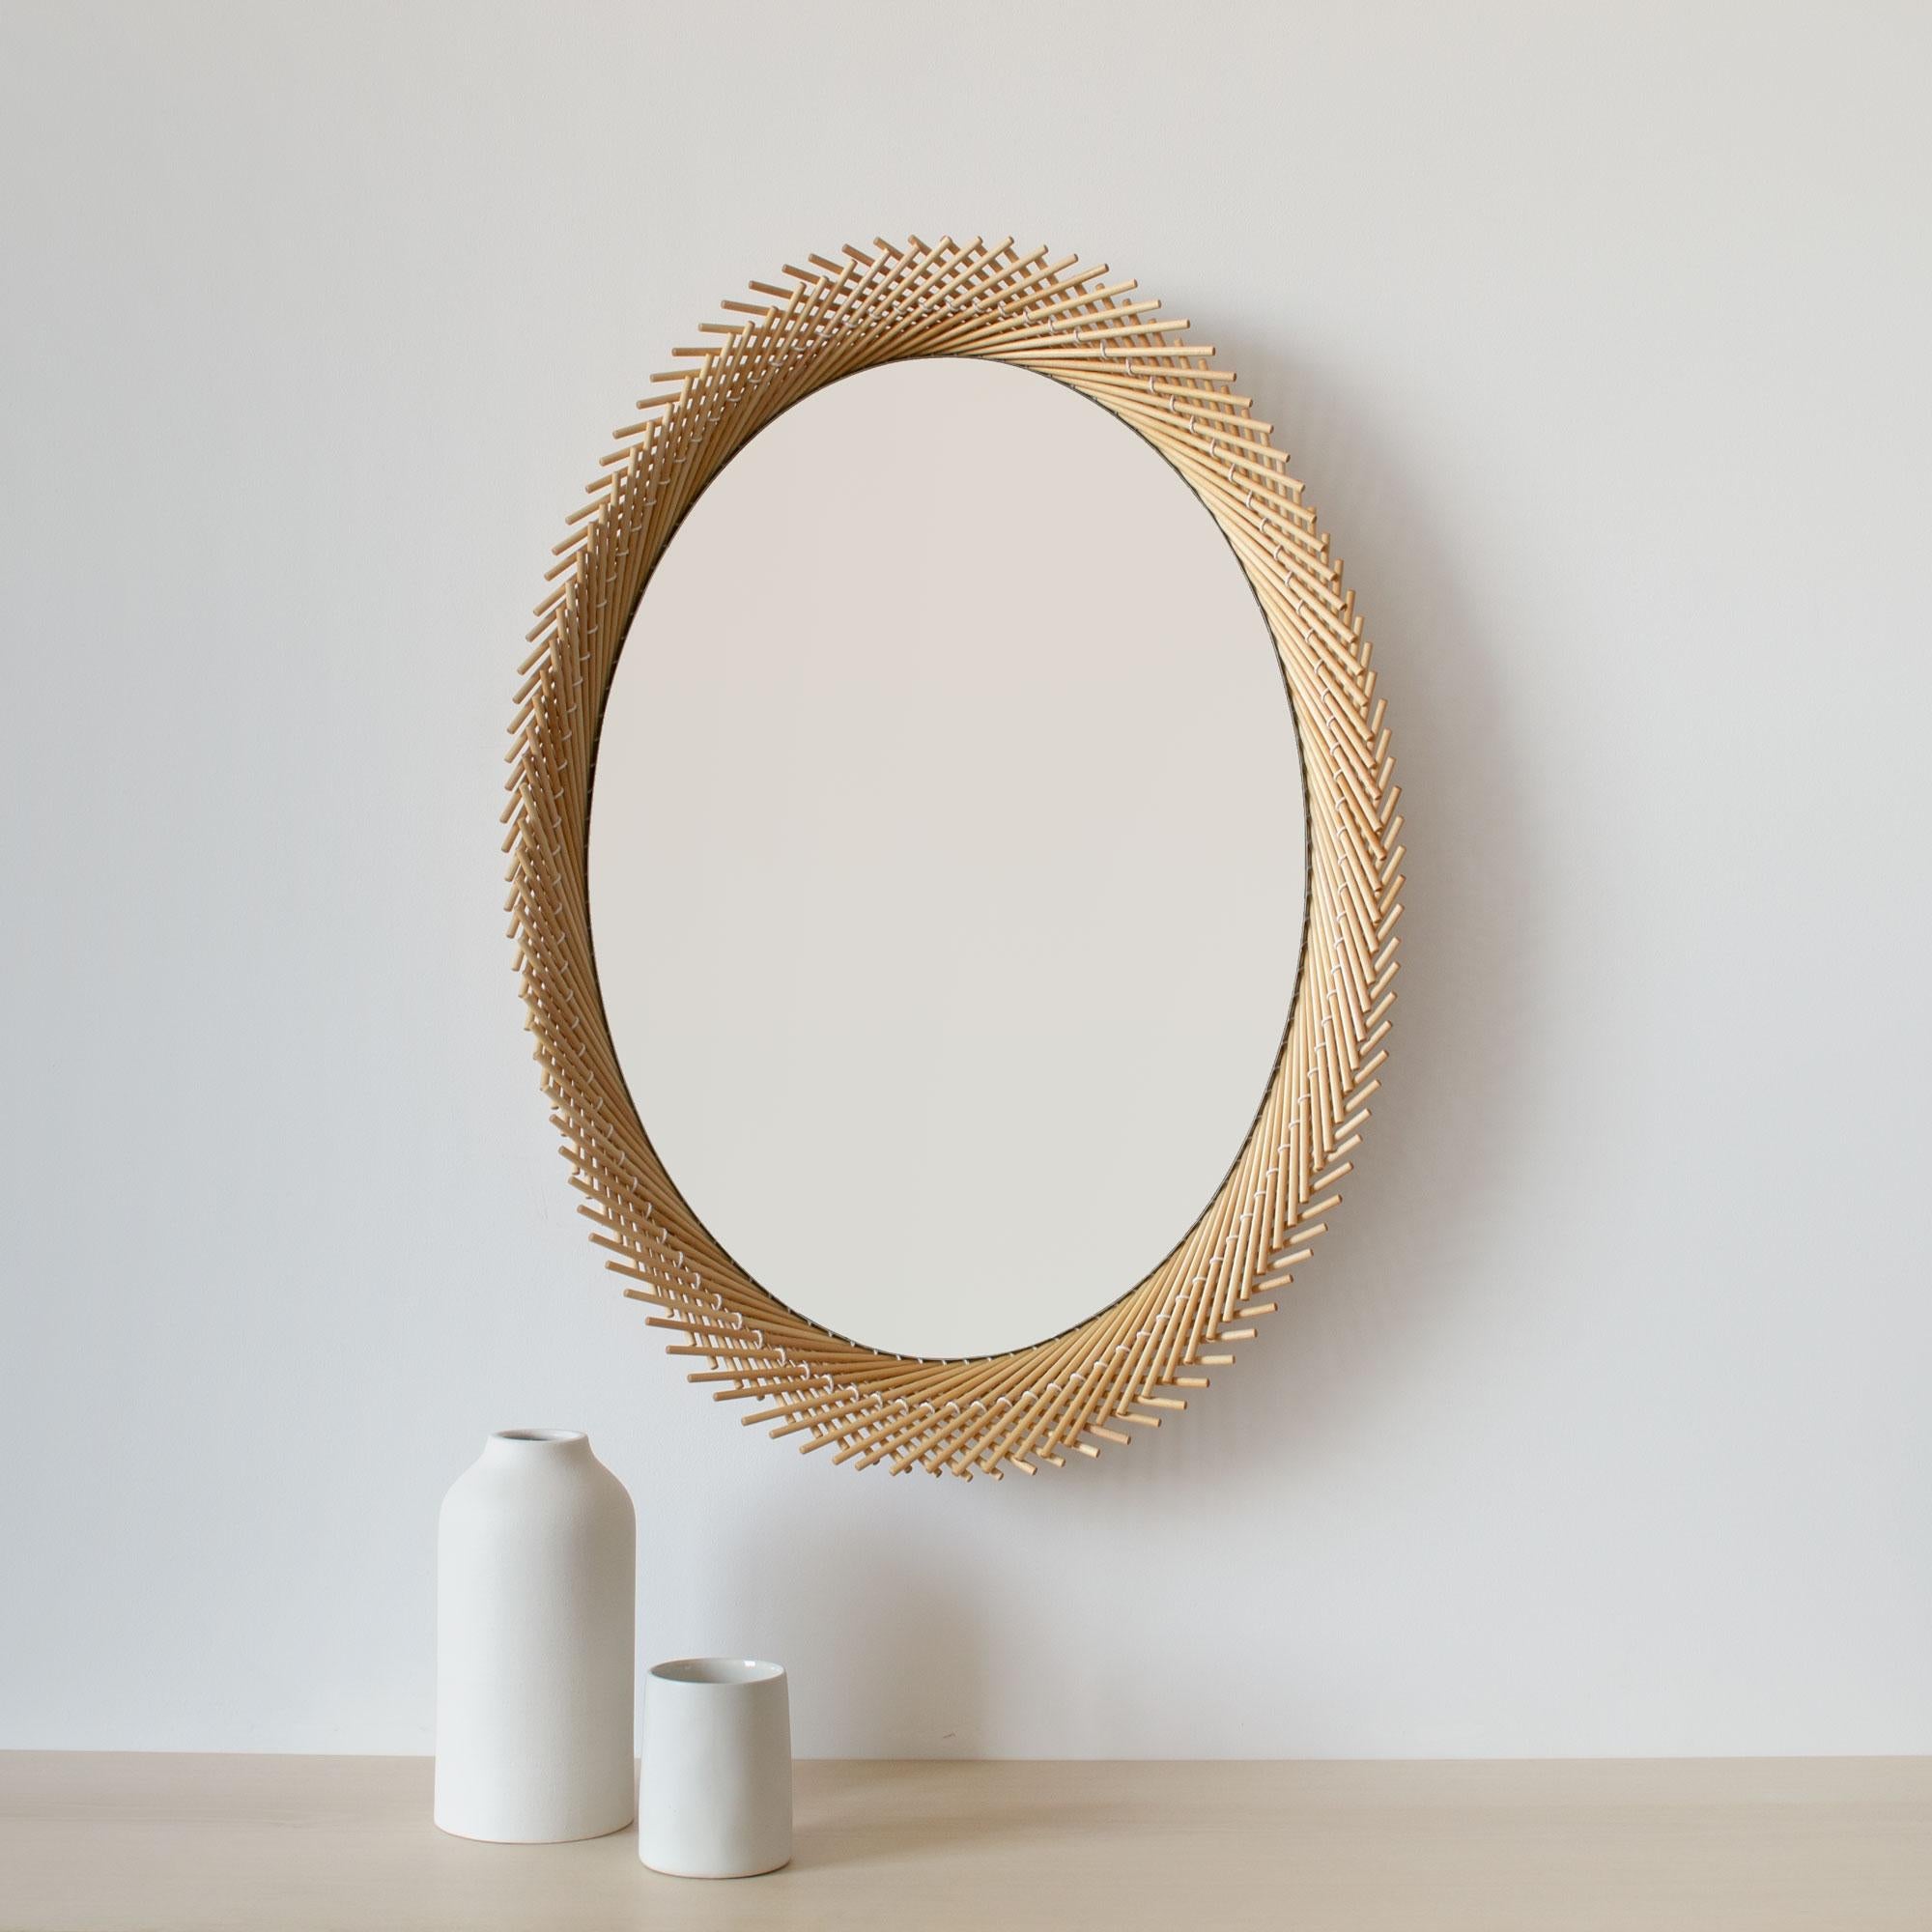 Mooda Mirror Round 24 / Natural Maple Wood, Clear Mirror by INDO- For Sale 2